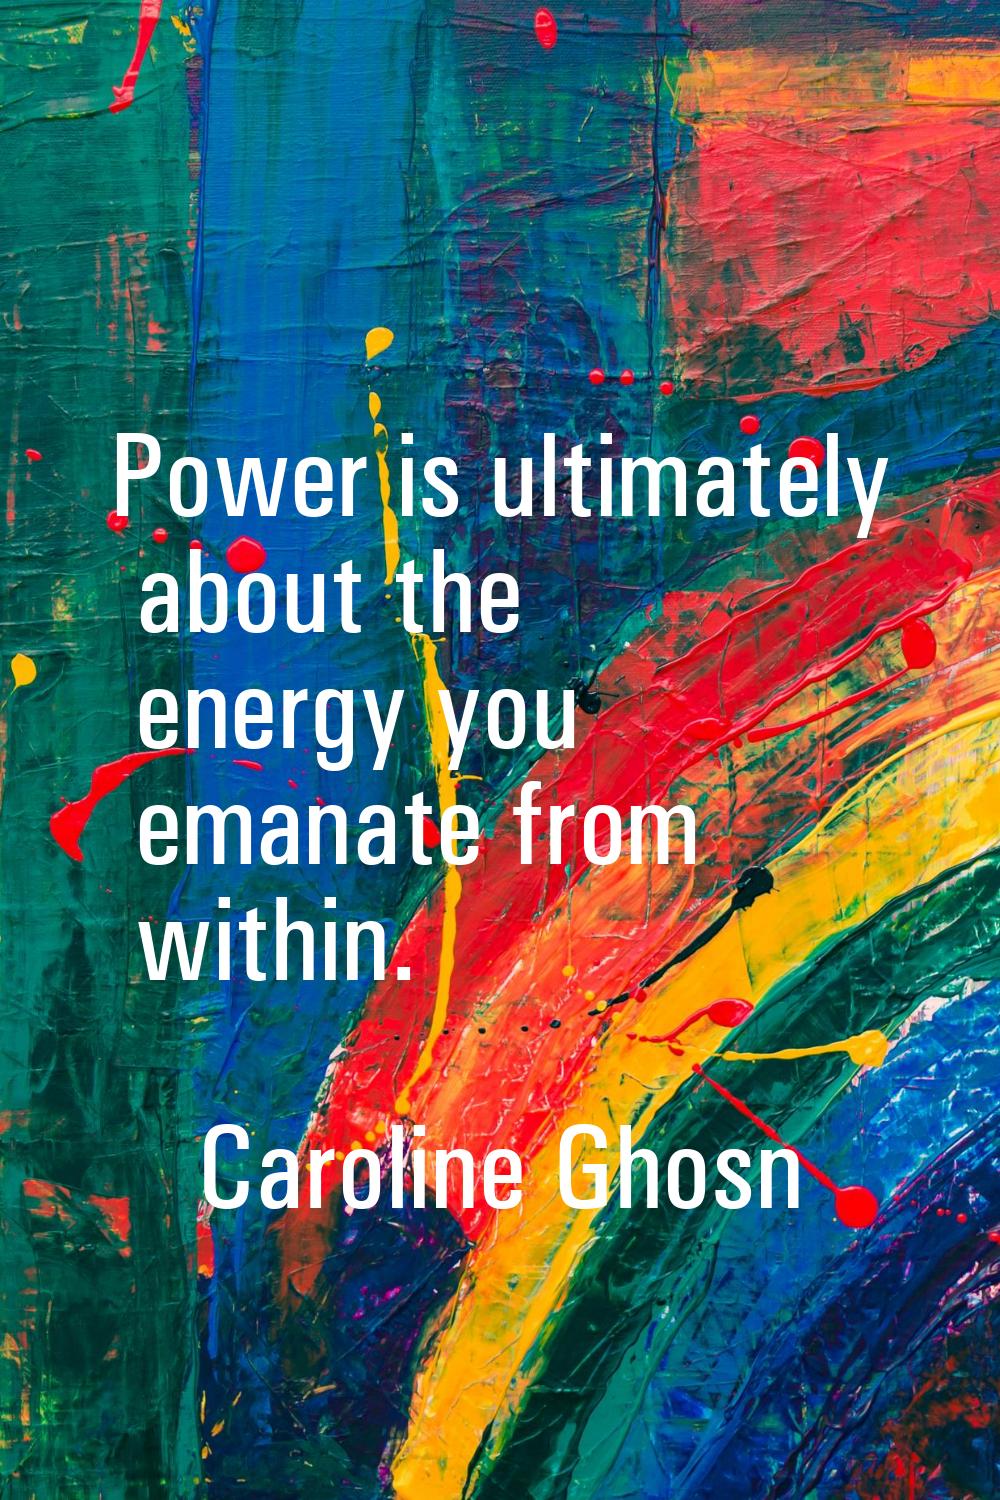 Power is ultimately about the energy you emanate from within.